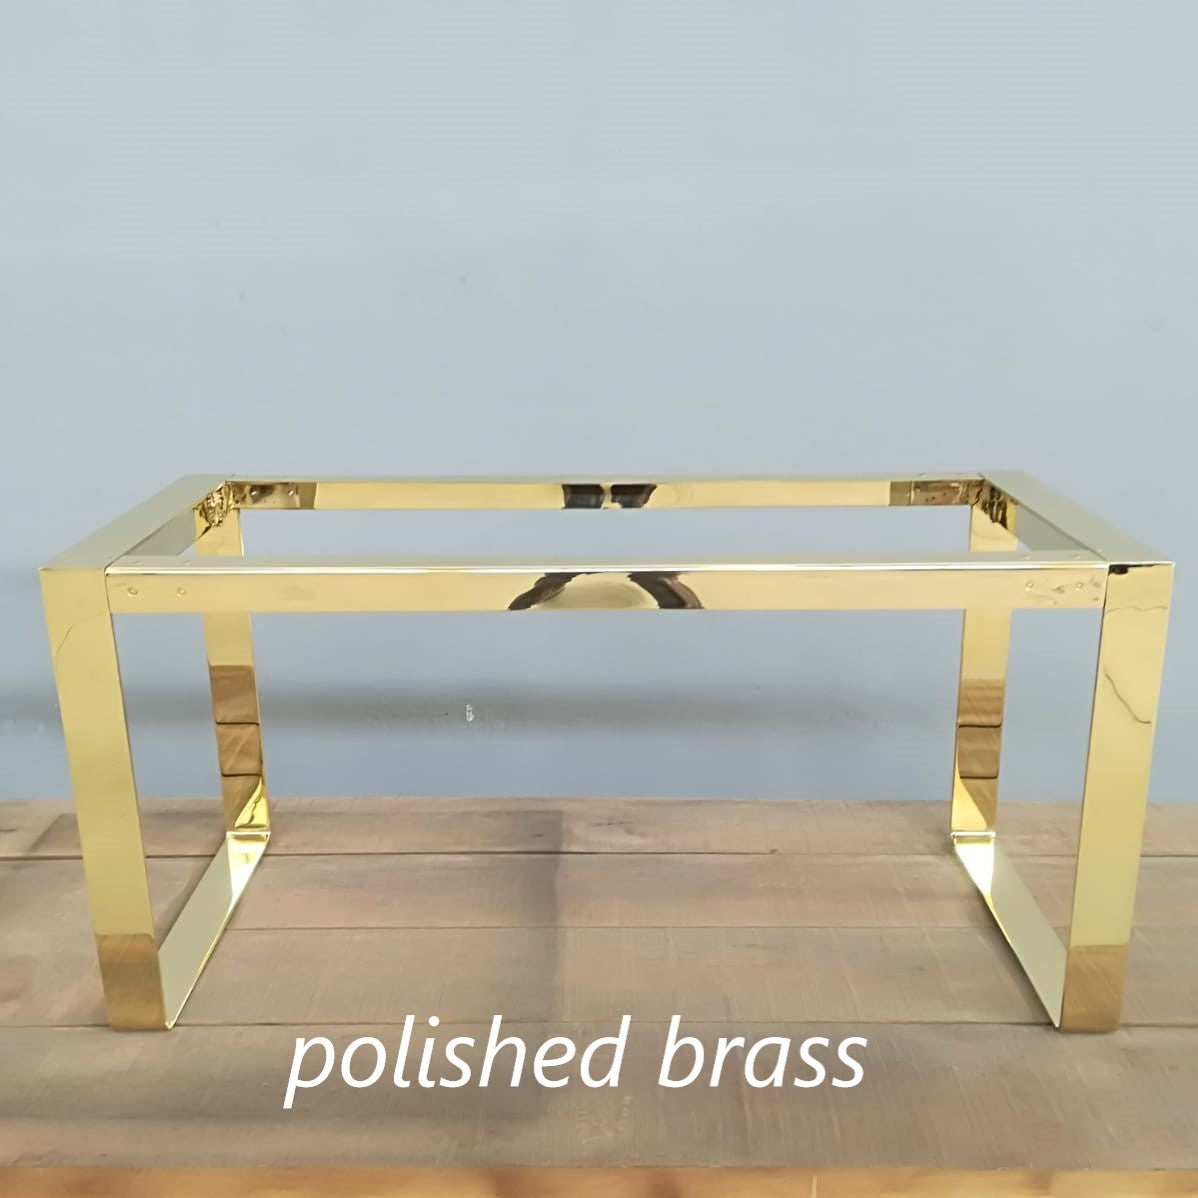 Brass Table Base ;28" H X 28" W x 52” L Flat Brass Table Base, Height 26" - 32"